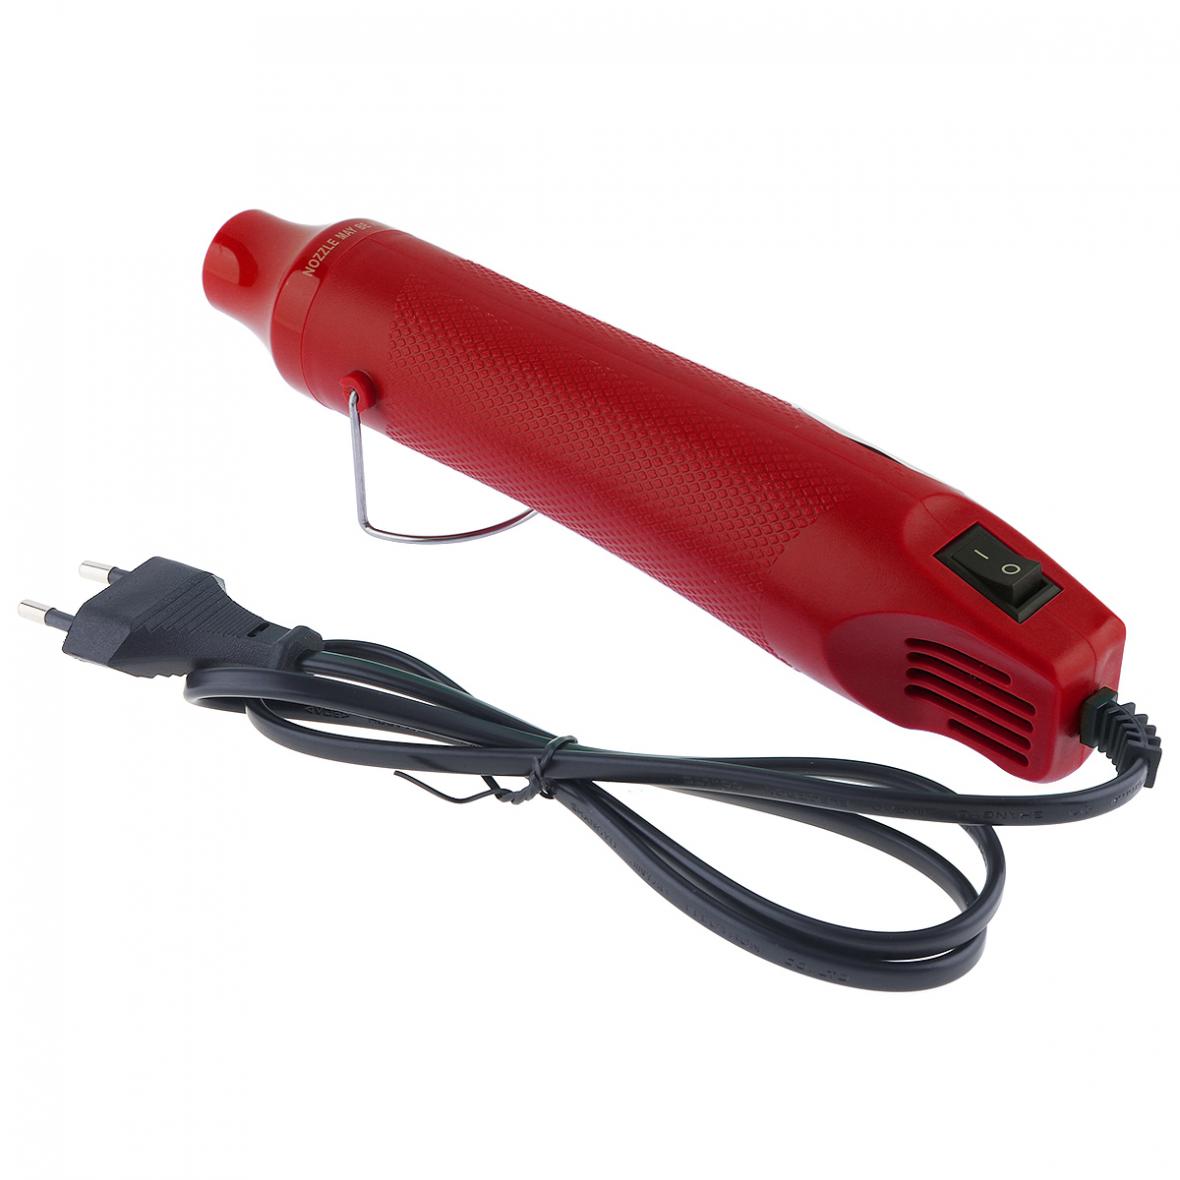 110V / 220V 300W Heat Gun Hot Air Electric Blower with Shrink Plastic Surface EU US Plug for Heating DIY Accessories